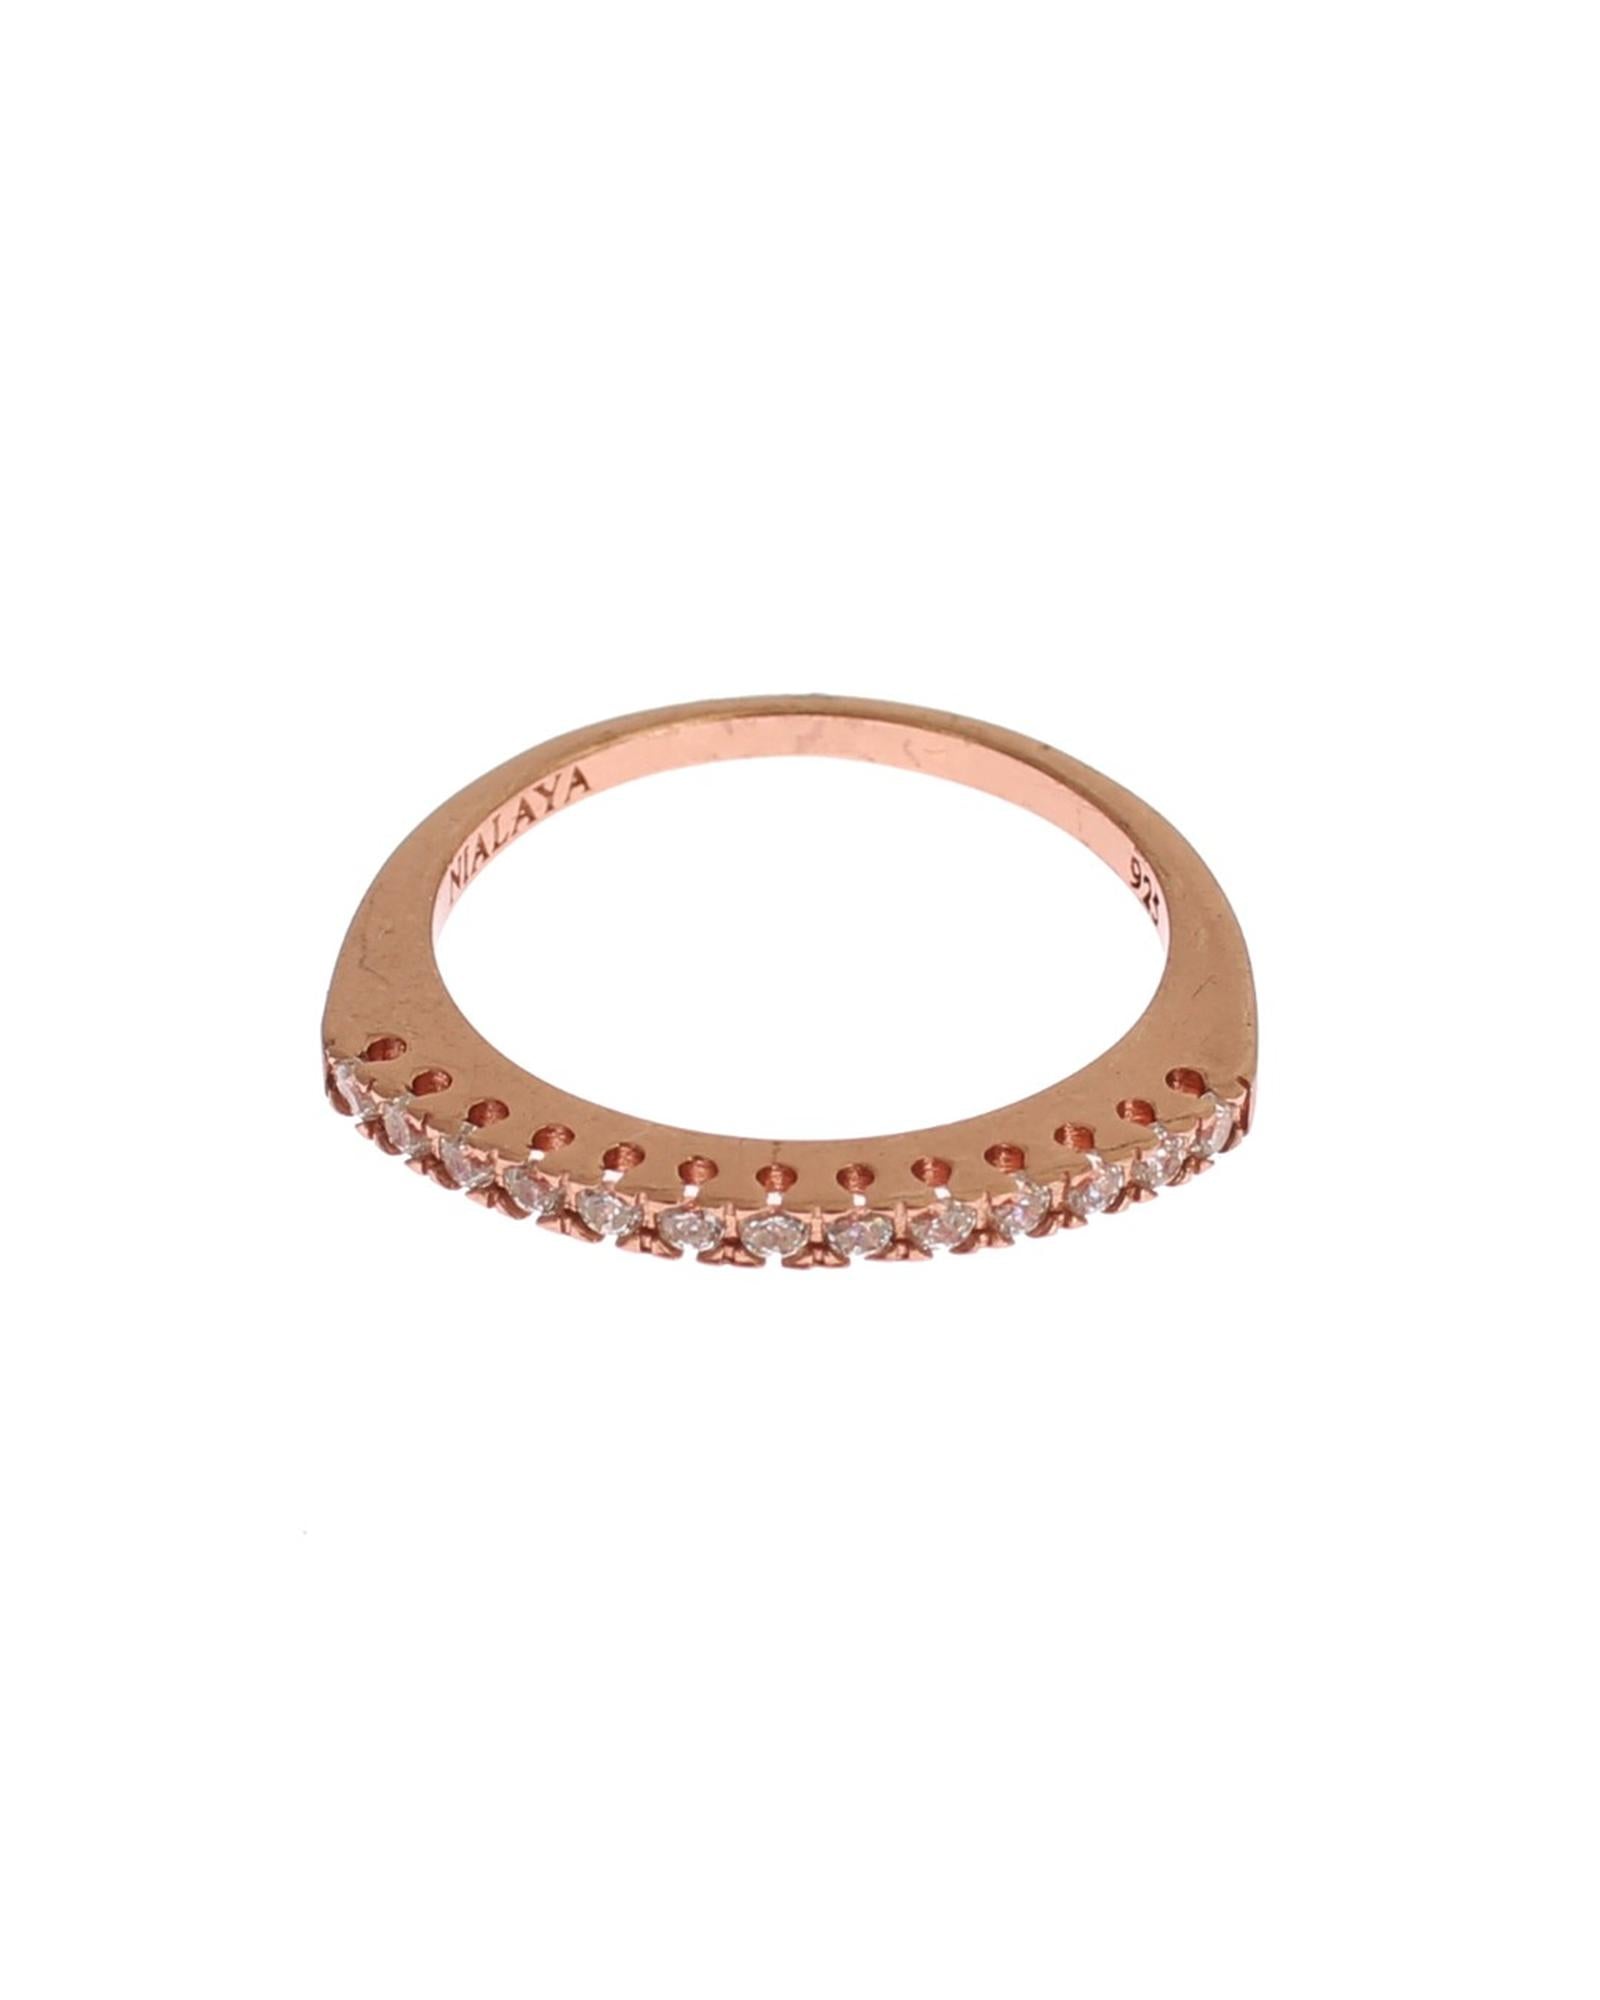 NIALAYA 18K Gold Plated Ring with Clear CZ Crystals 47 EU Women